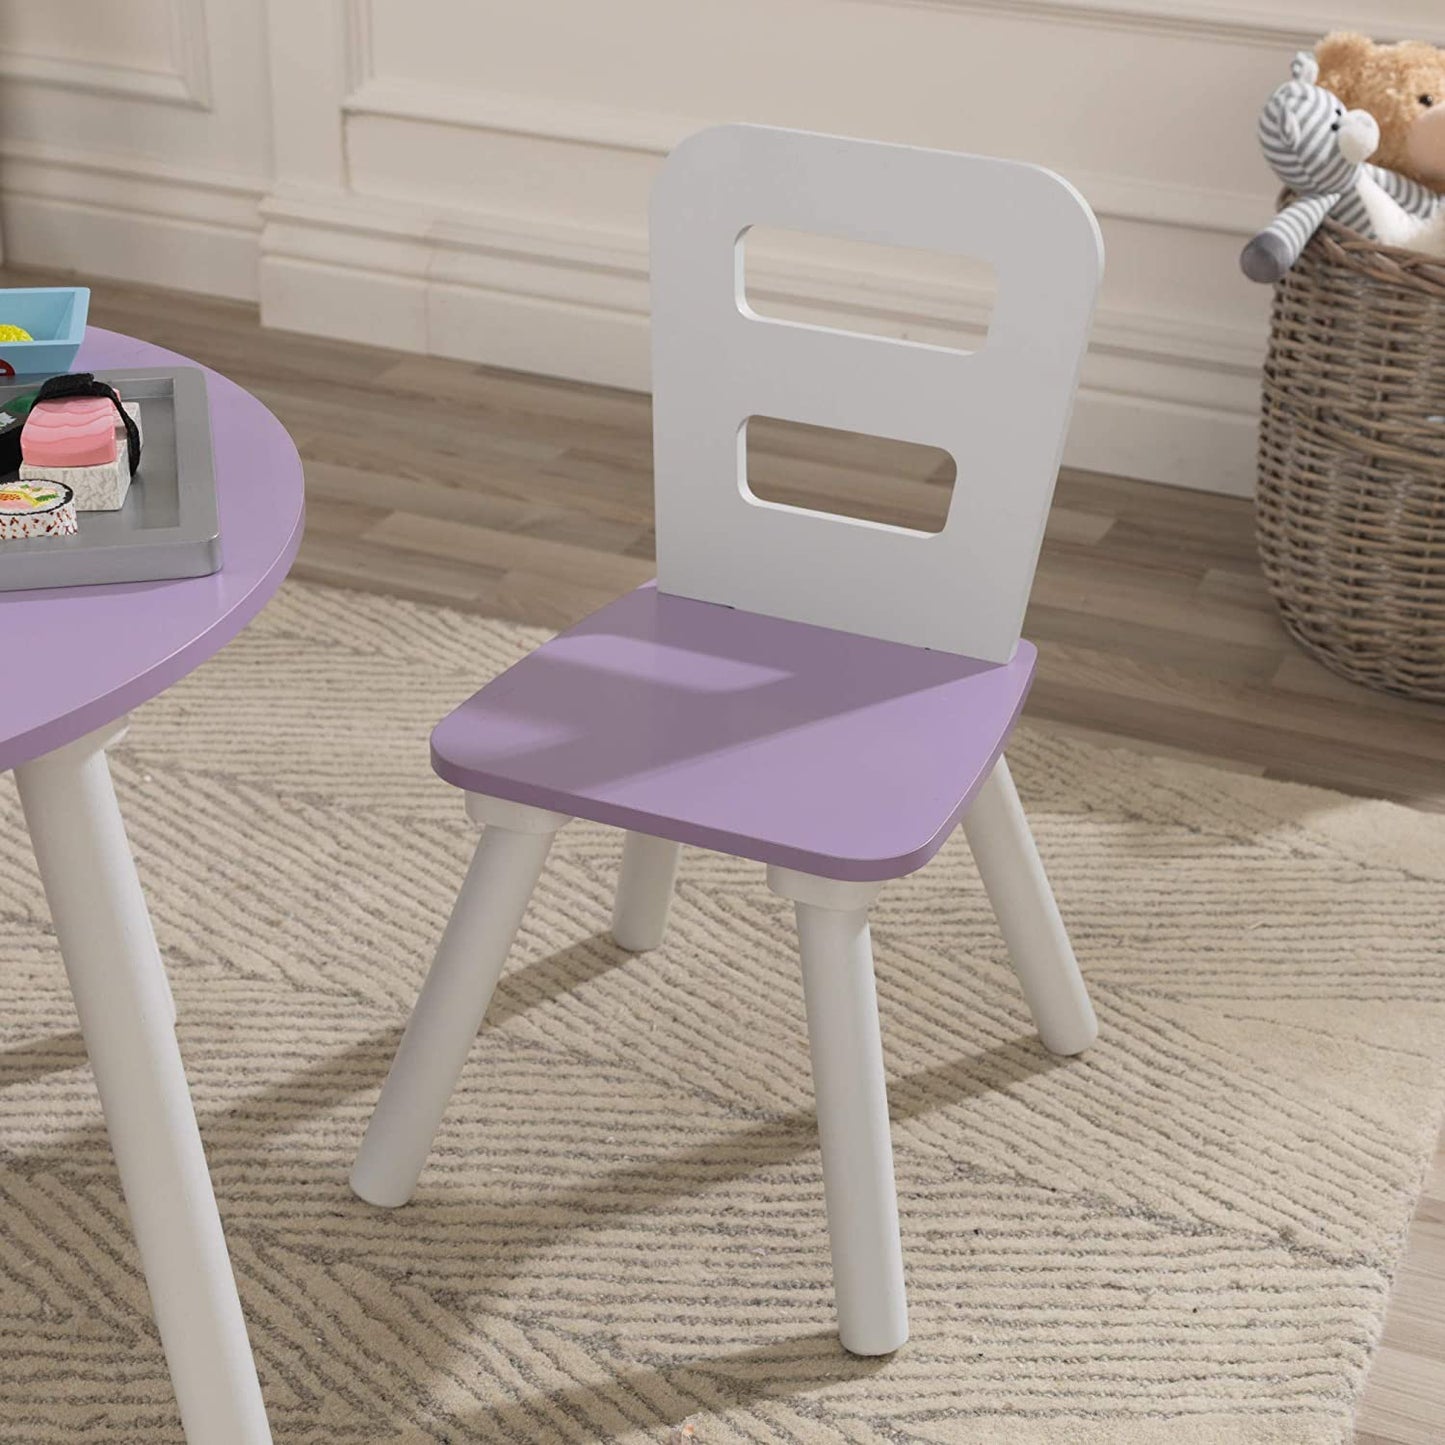 Round Table and 2 Chair Set for children (Lavender) - Little Kids Business